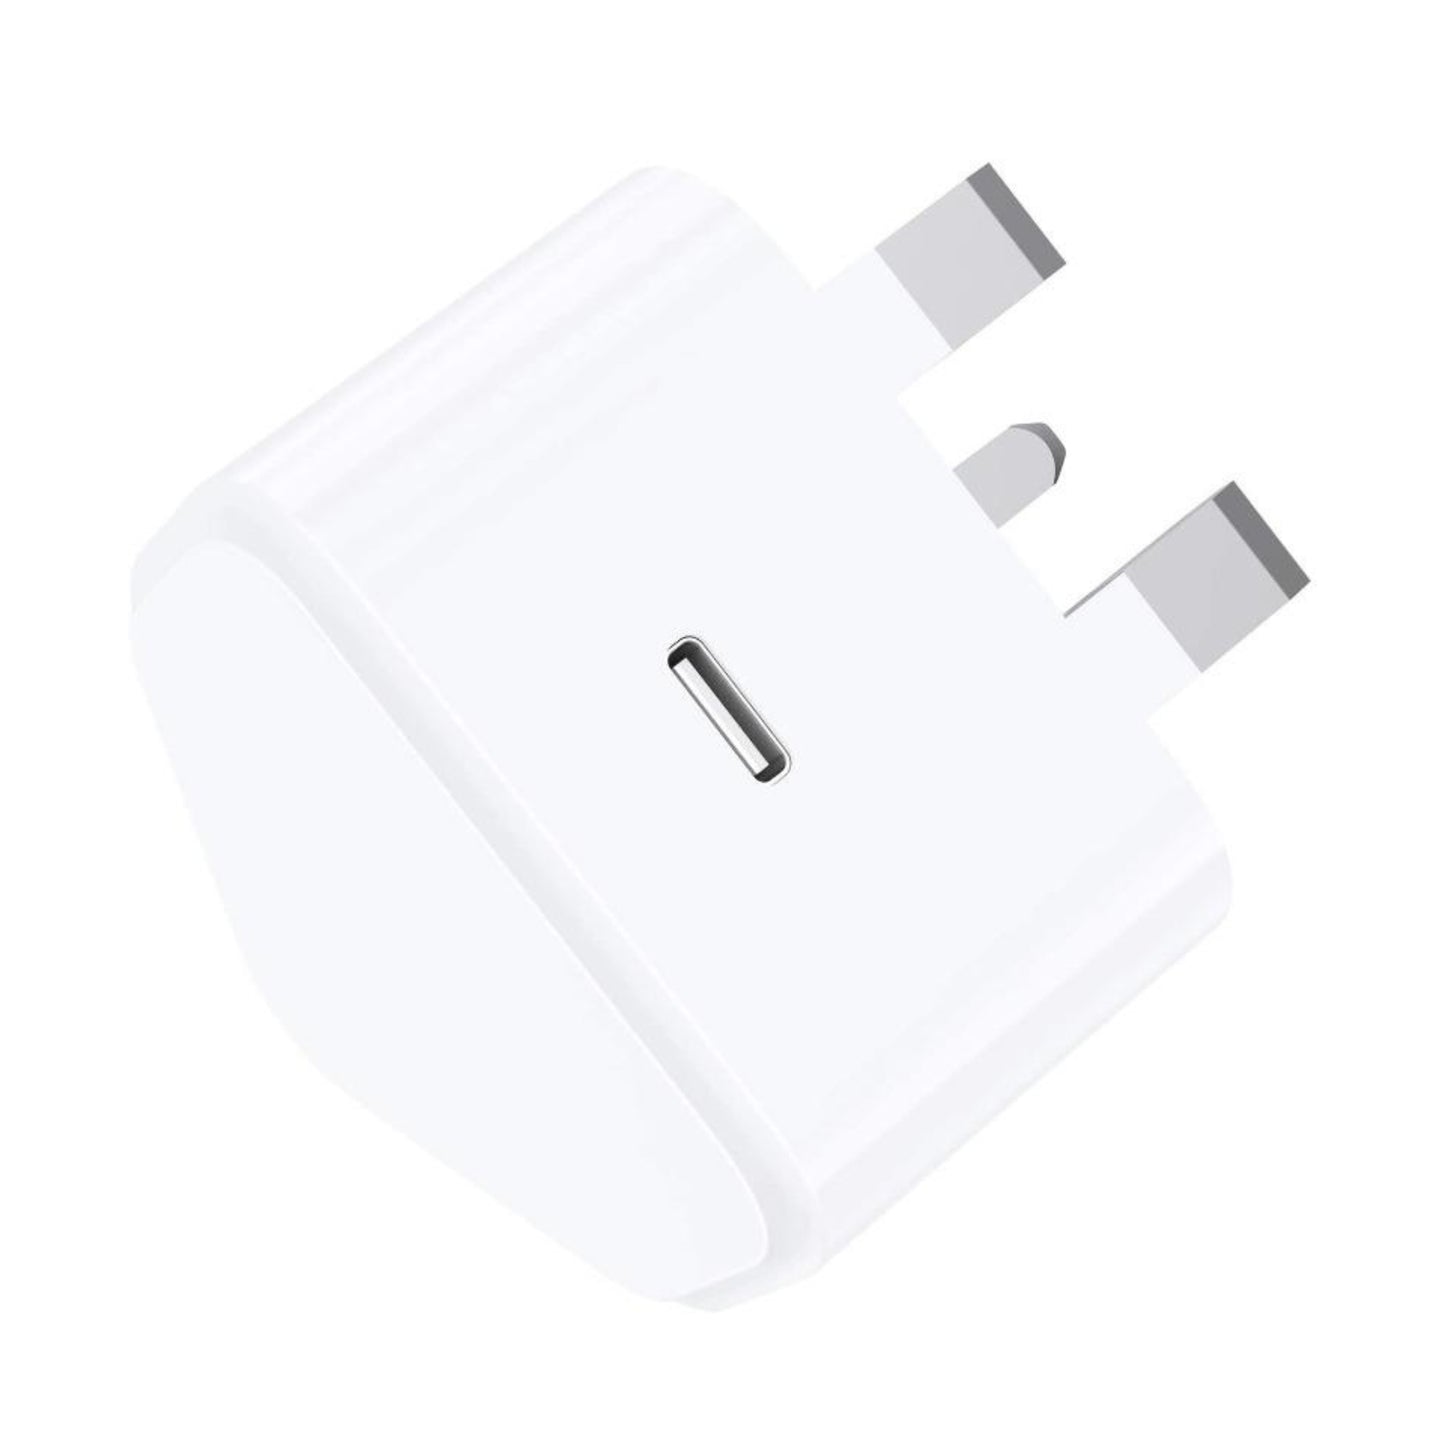 AXIULOO 20W USB C Fast Charger Plug for iPhone 14/14 Mini 14 Pro 14 Pro Max 13/13 Mini/13 Pro/13 Pro Max 12/12 Mini/12 Pro/12 Pro Max 11 SE 2020, iPad Pro, AirPods Pro, USBC PD 3.0 Mains UK Type C Wall Charging Power Adapter